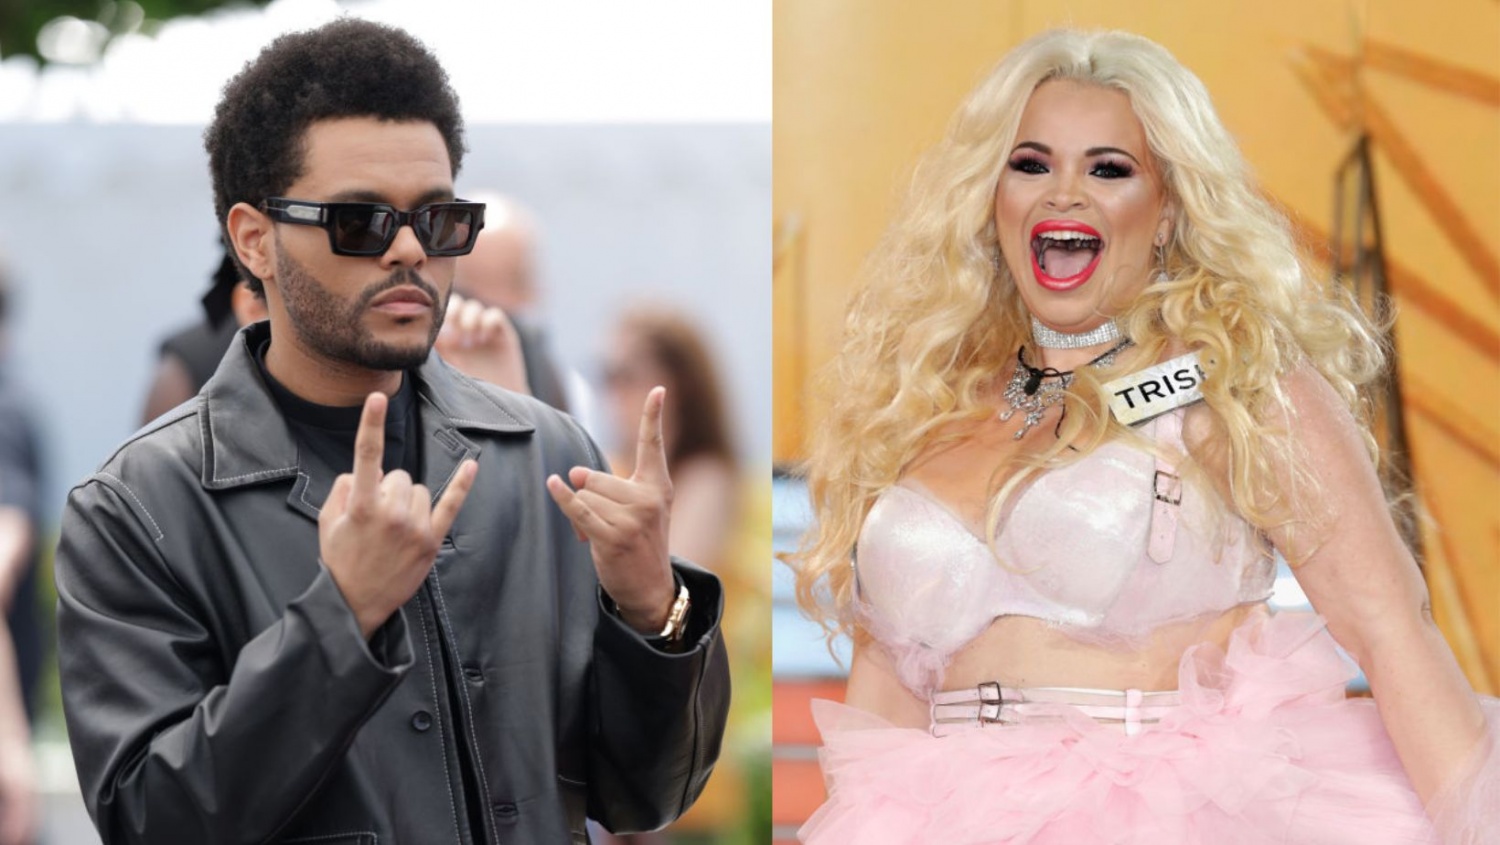 Trisha Paytas Announces Collab With The Weeknd, Netizens Clown Her: 'I Think She Means the Weekday'